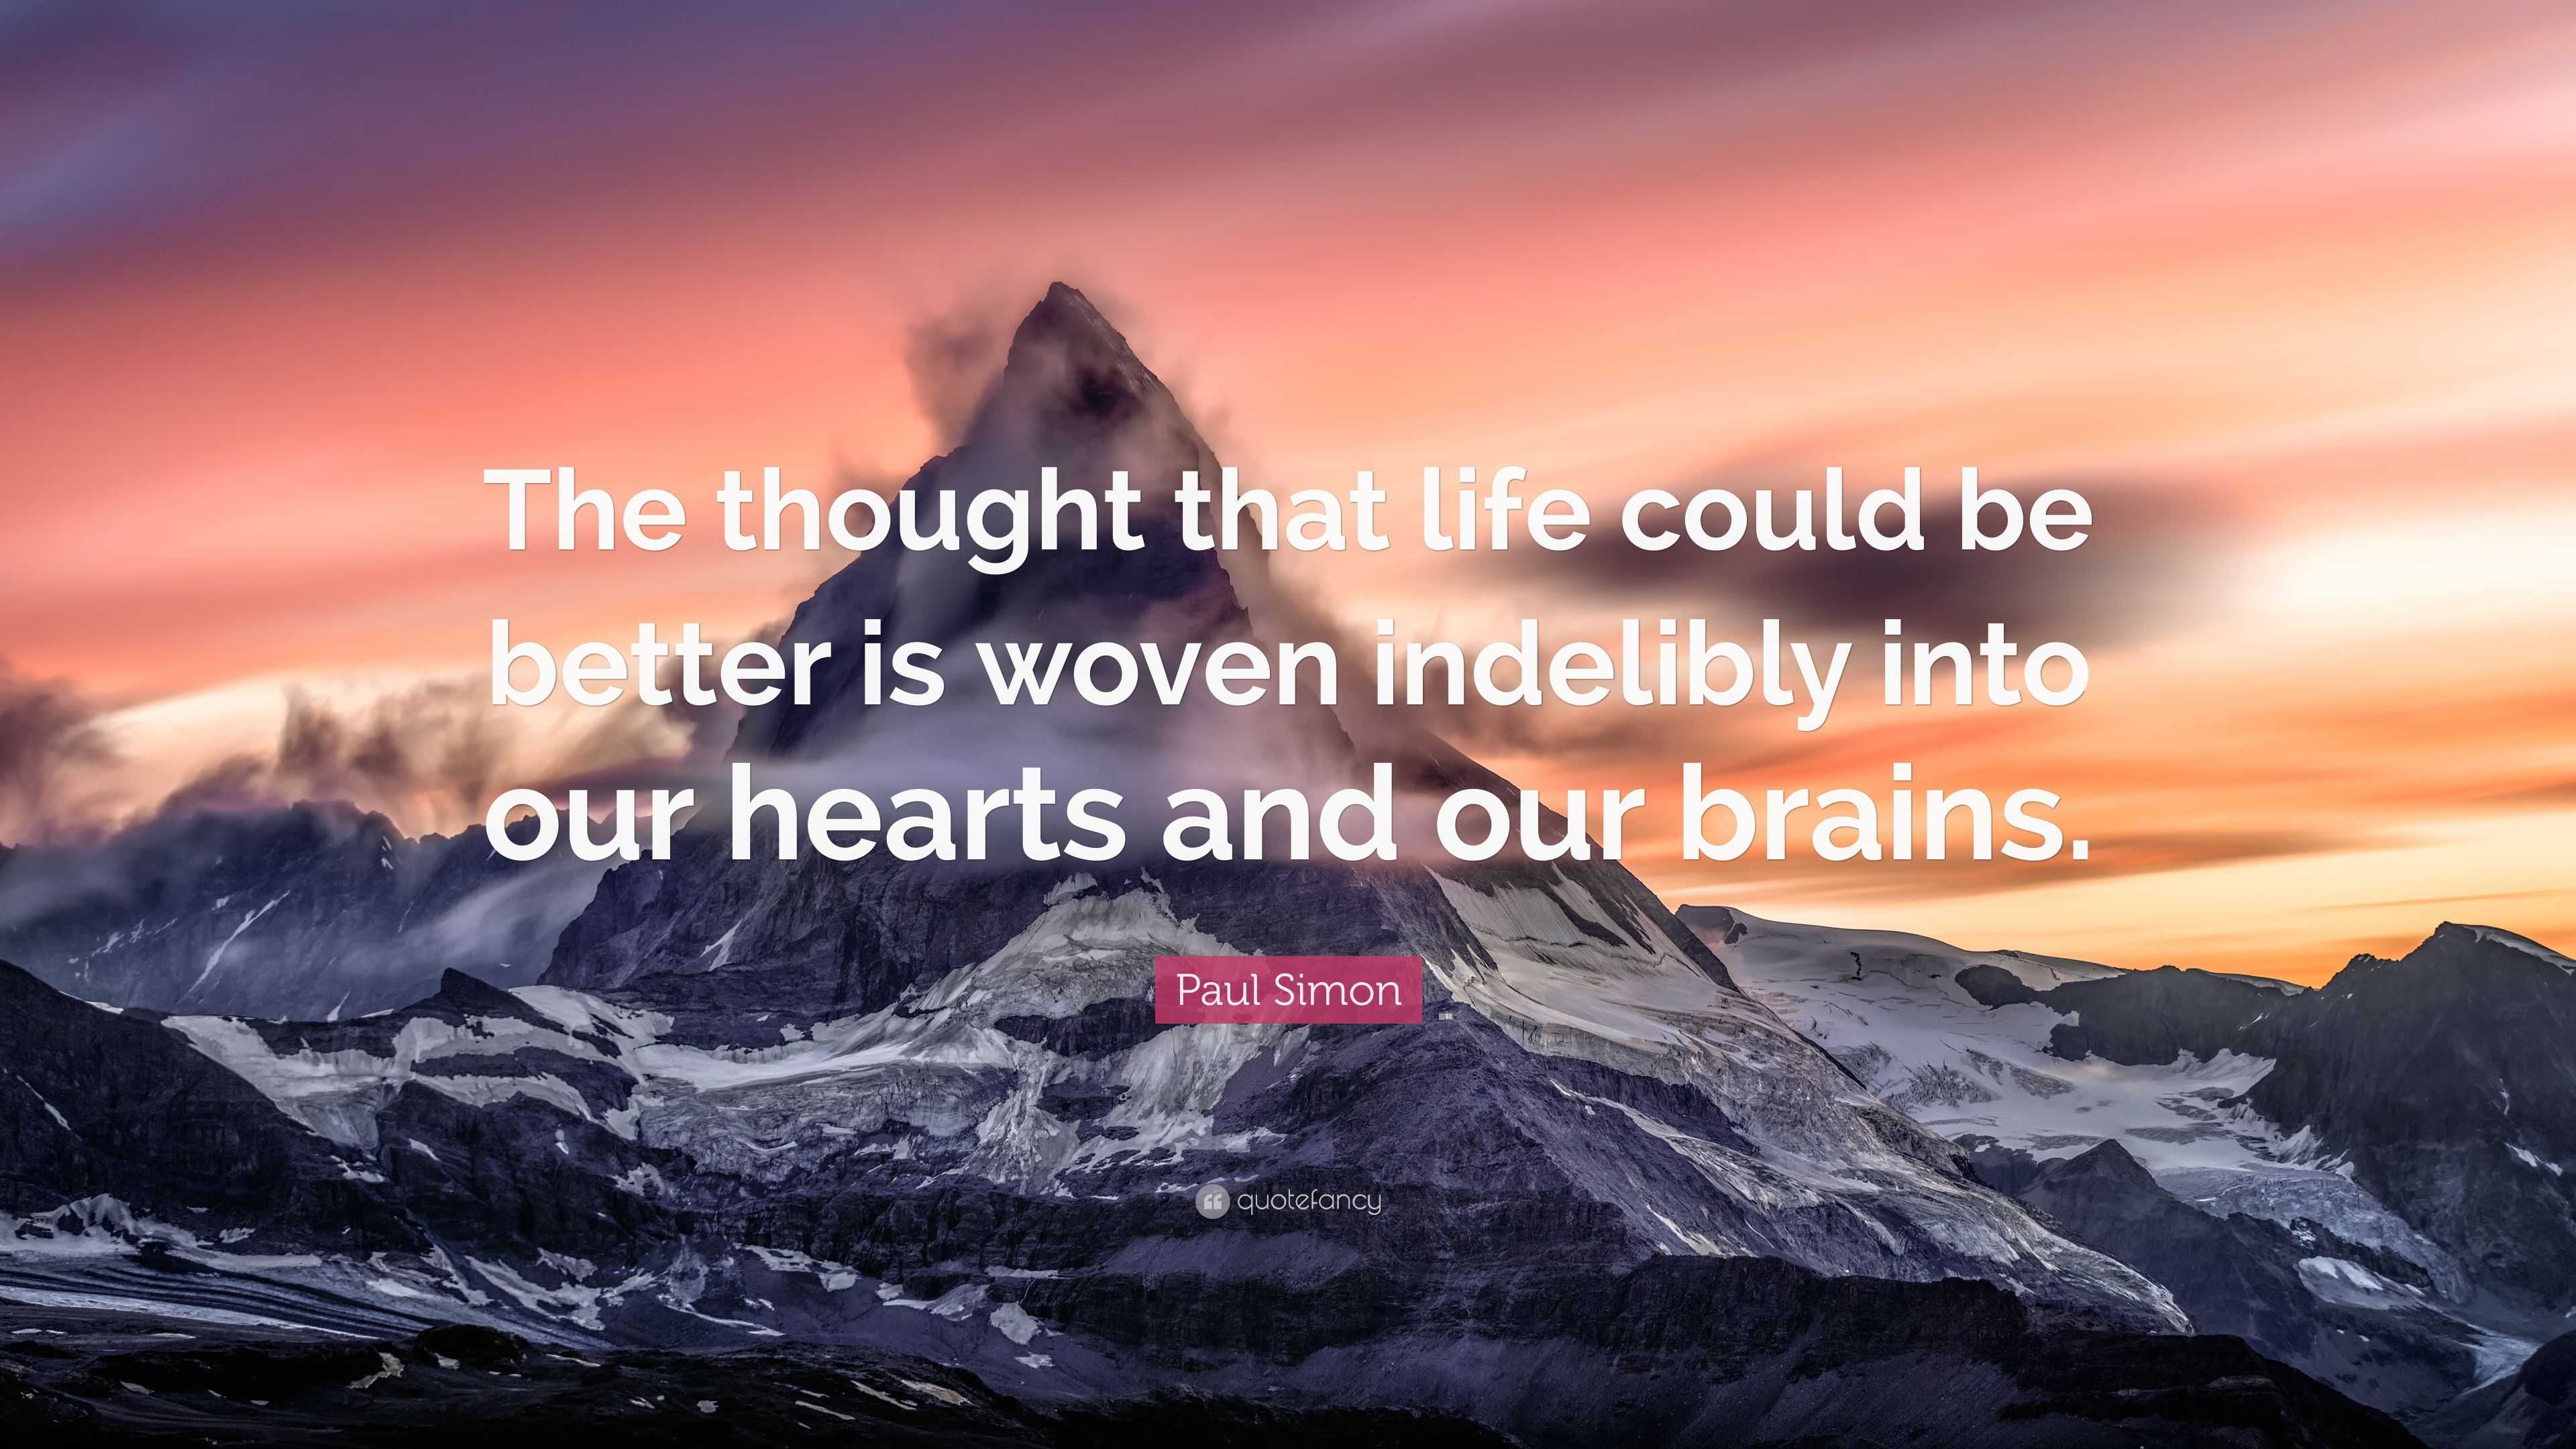 Paul Simon Quote: "The thought that life could be better is woven indelibly into our hearts and ...